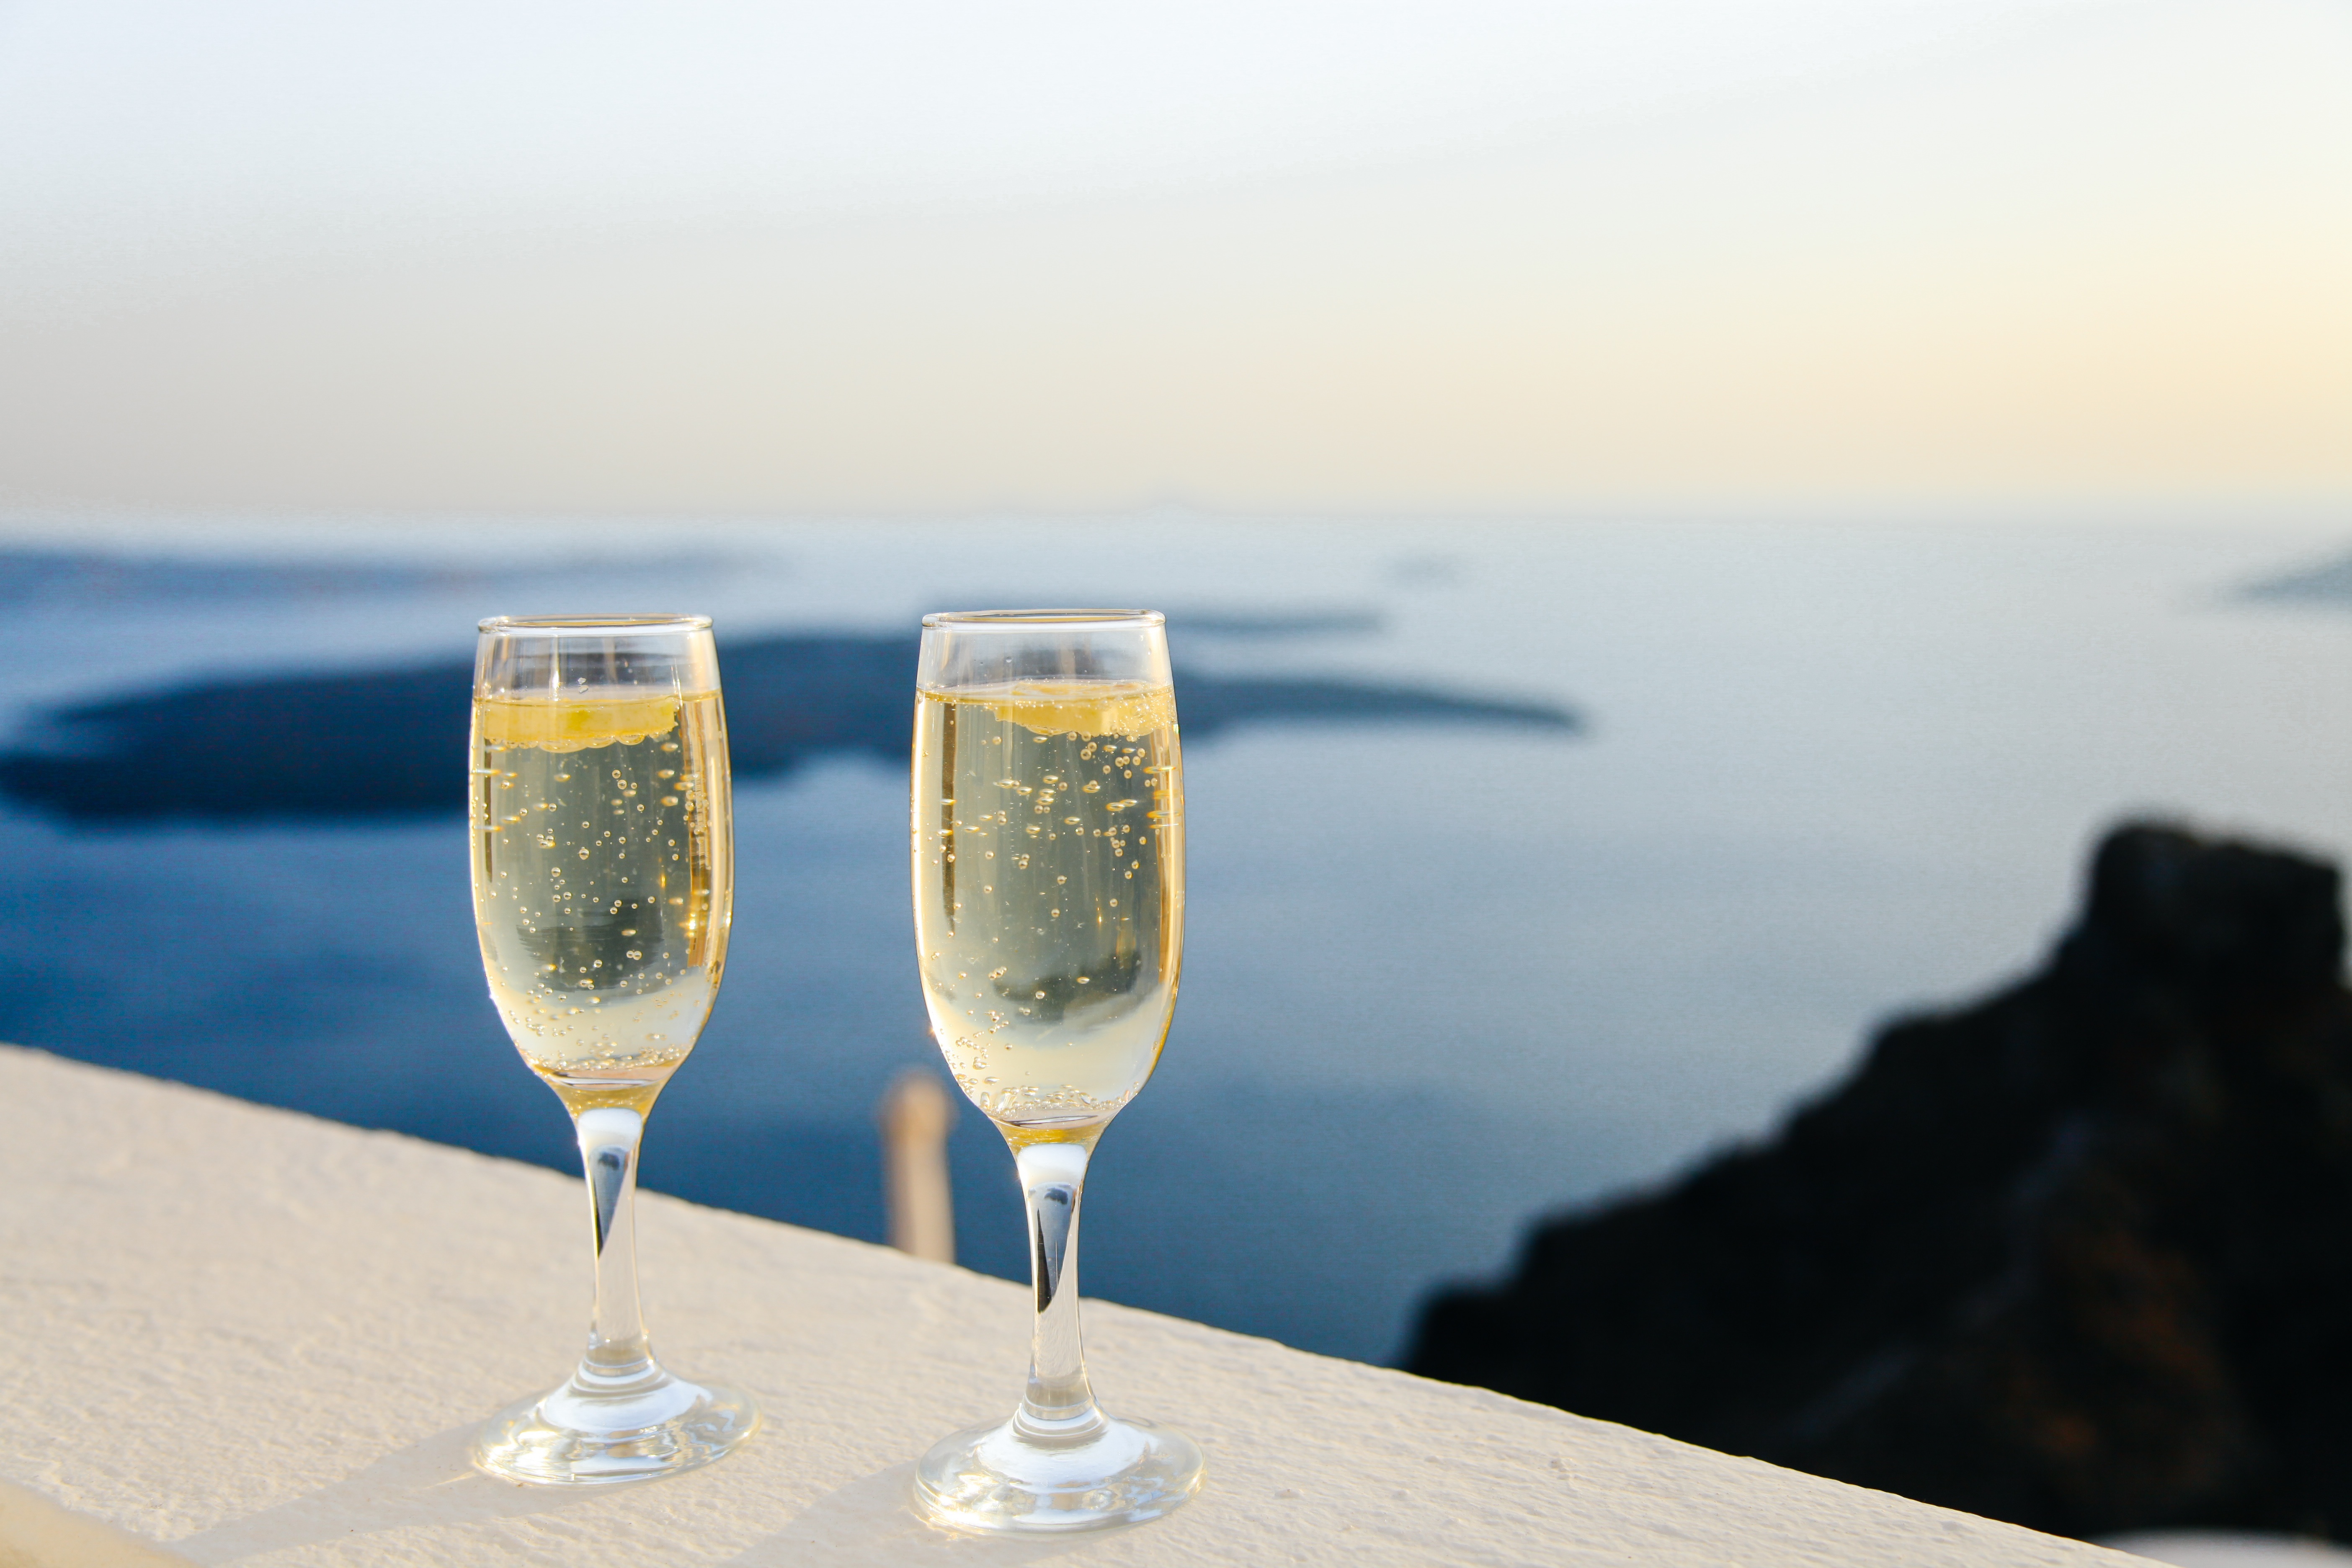 Italian Sparkling Wines – Beyond Prosecco